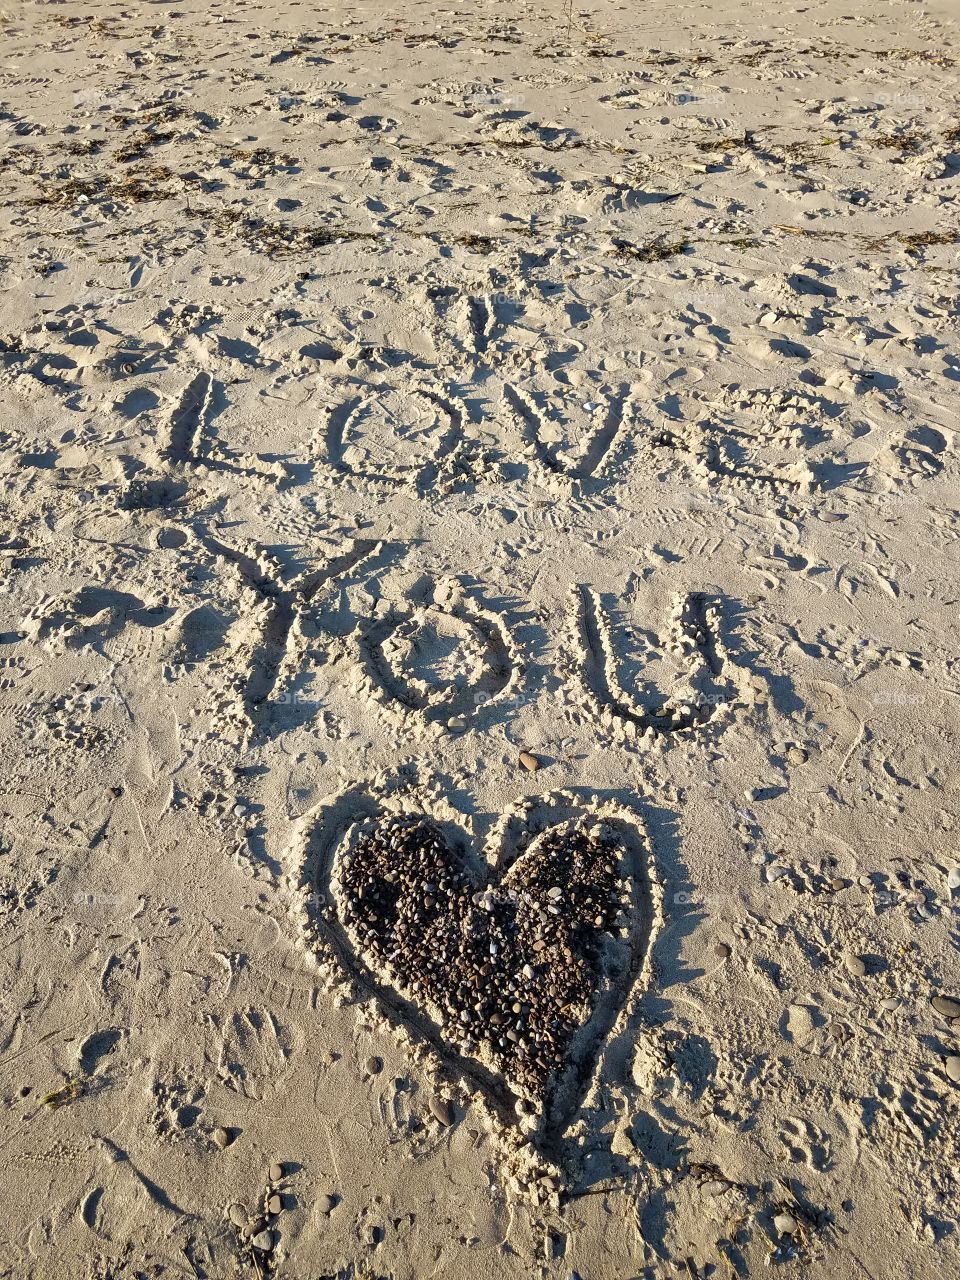 On one of my daily walks along the lake shore, I came across this familiar semtiment, creatively drawn in the sand. I love you was drawn in the sand, encircled by a large heart and a smaller heart, made with shells below it.